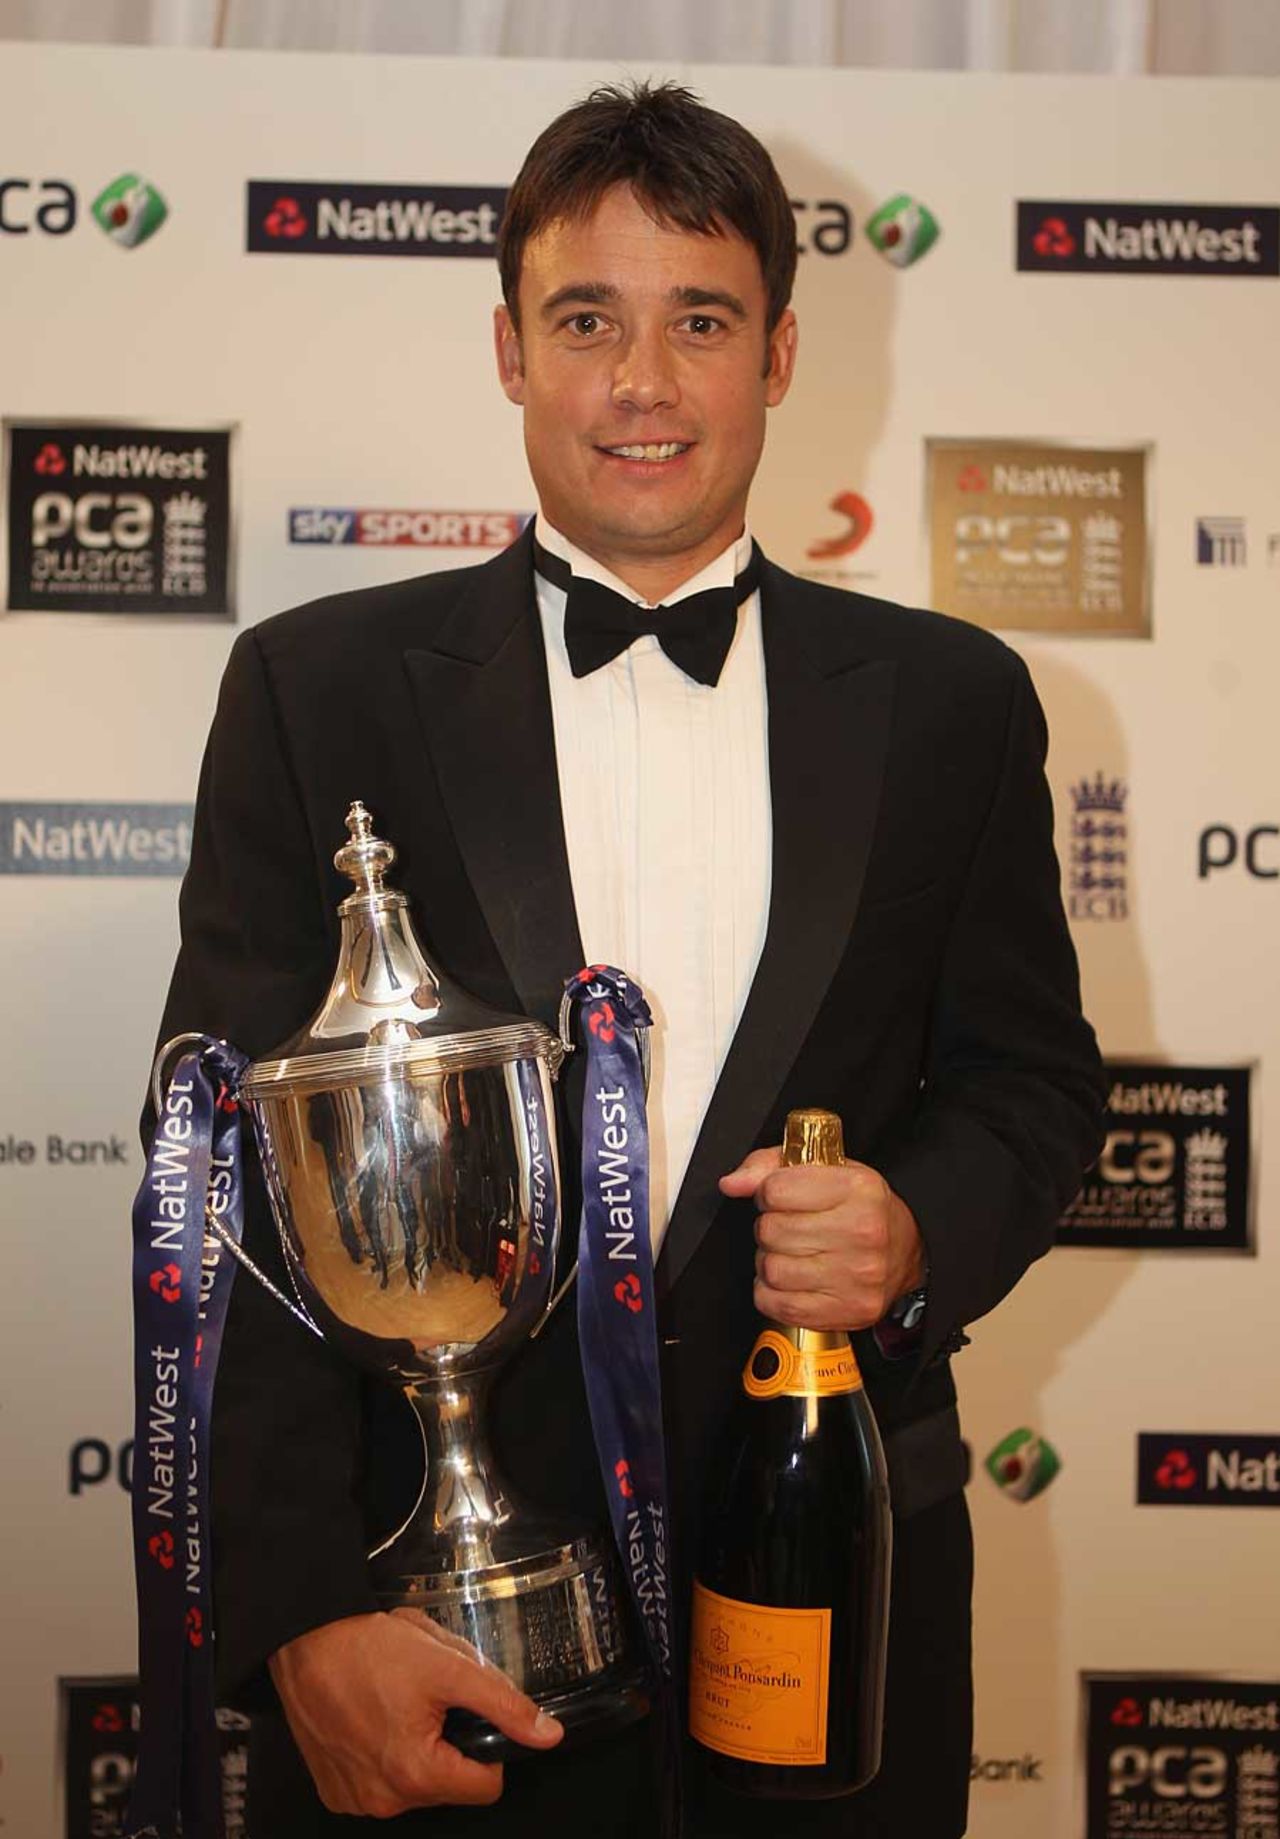 Neil Carter won the PCA Player of the Year award, London, September 23, 2010